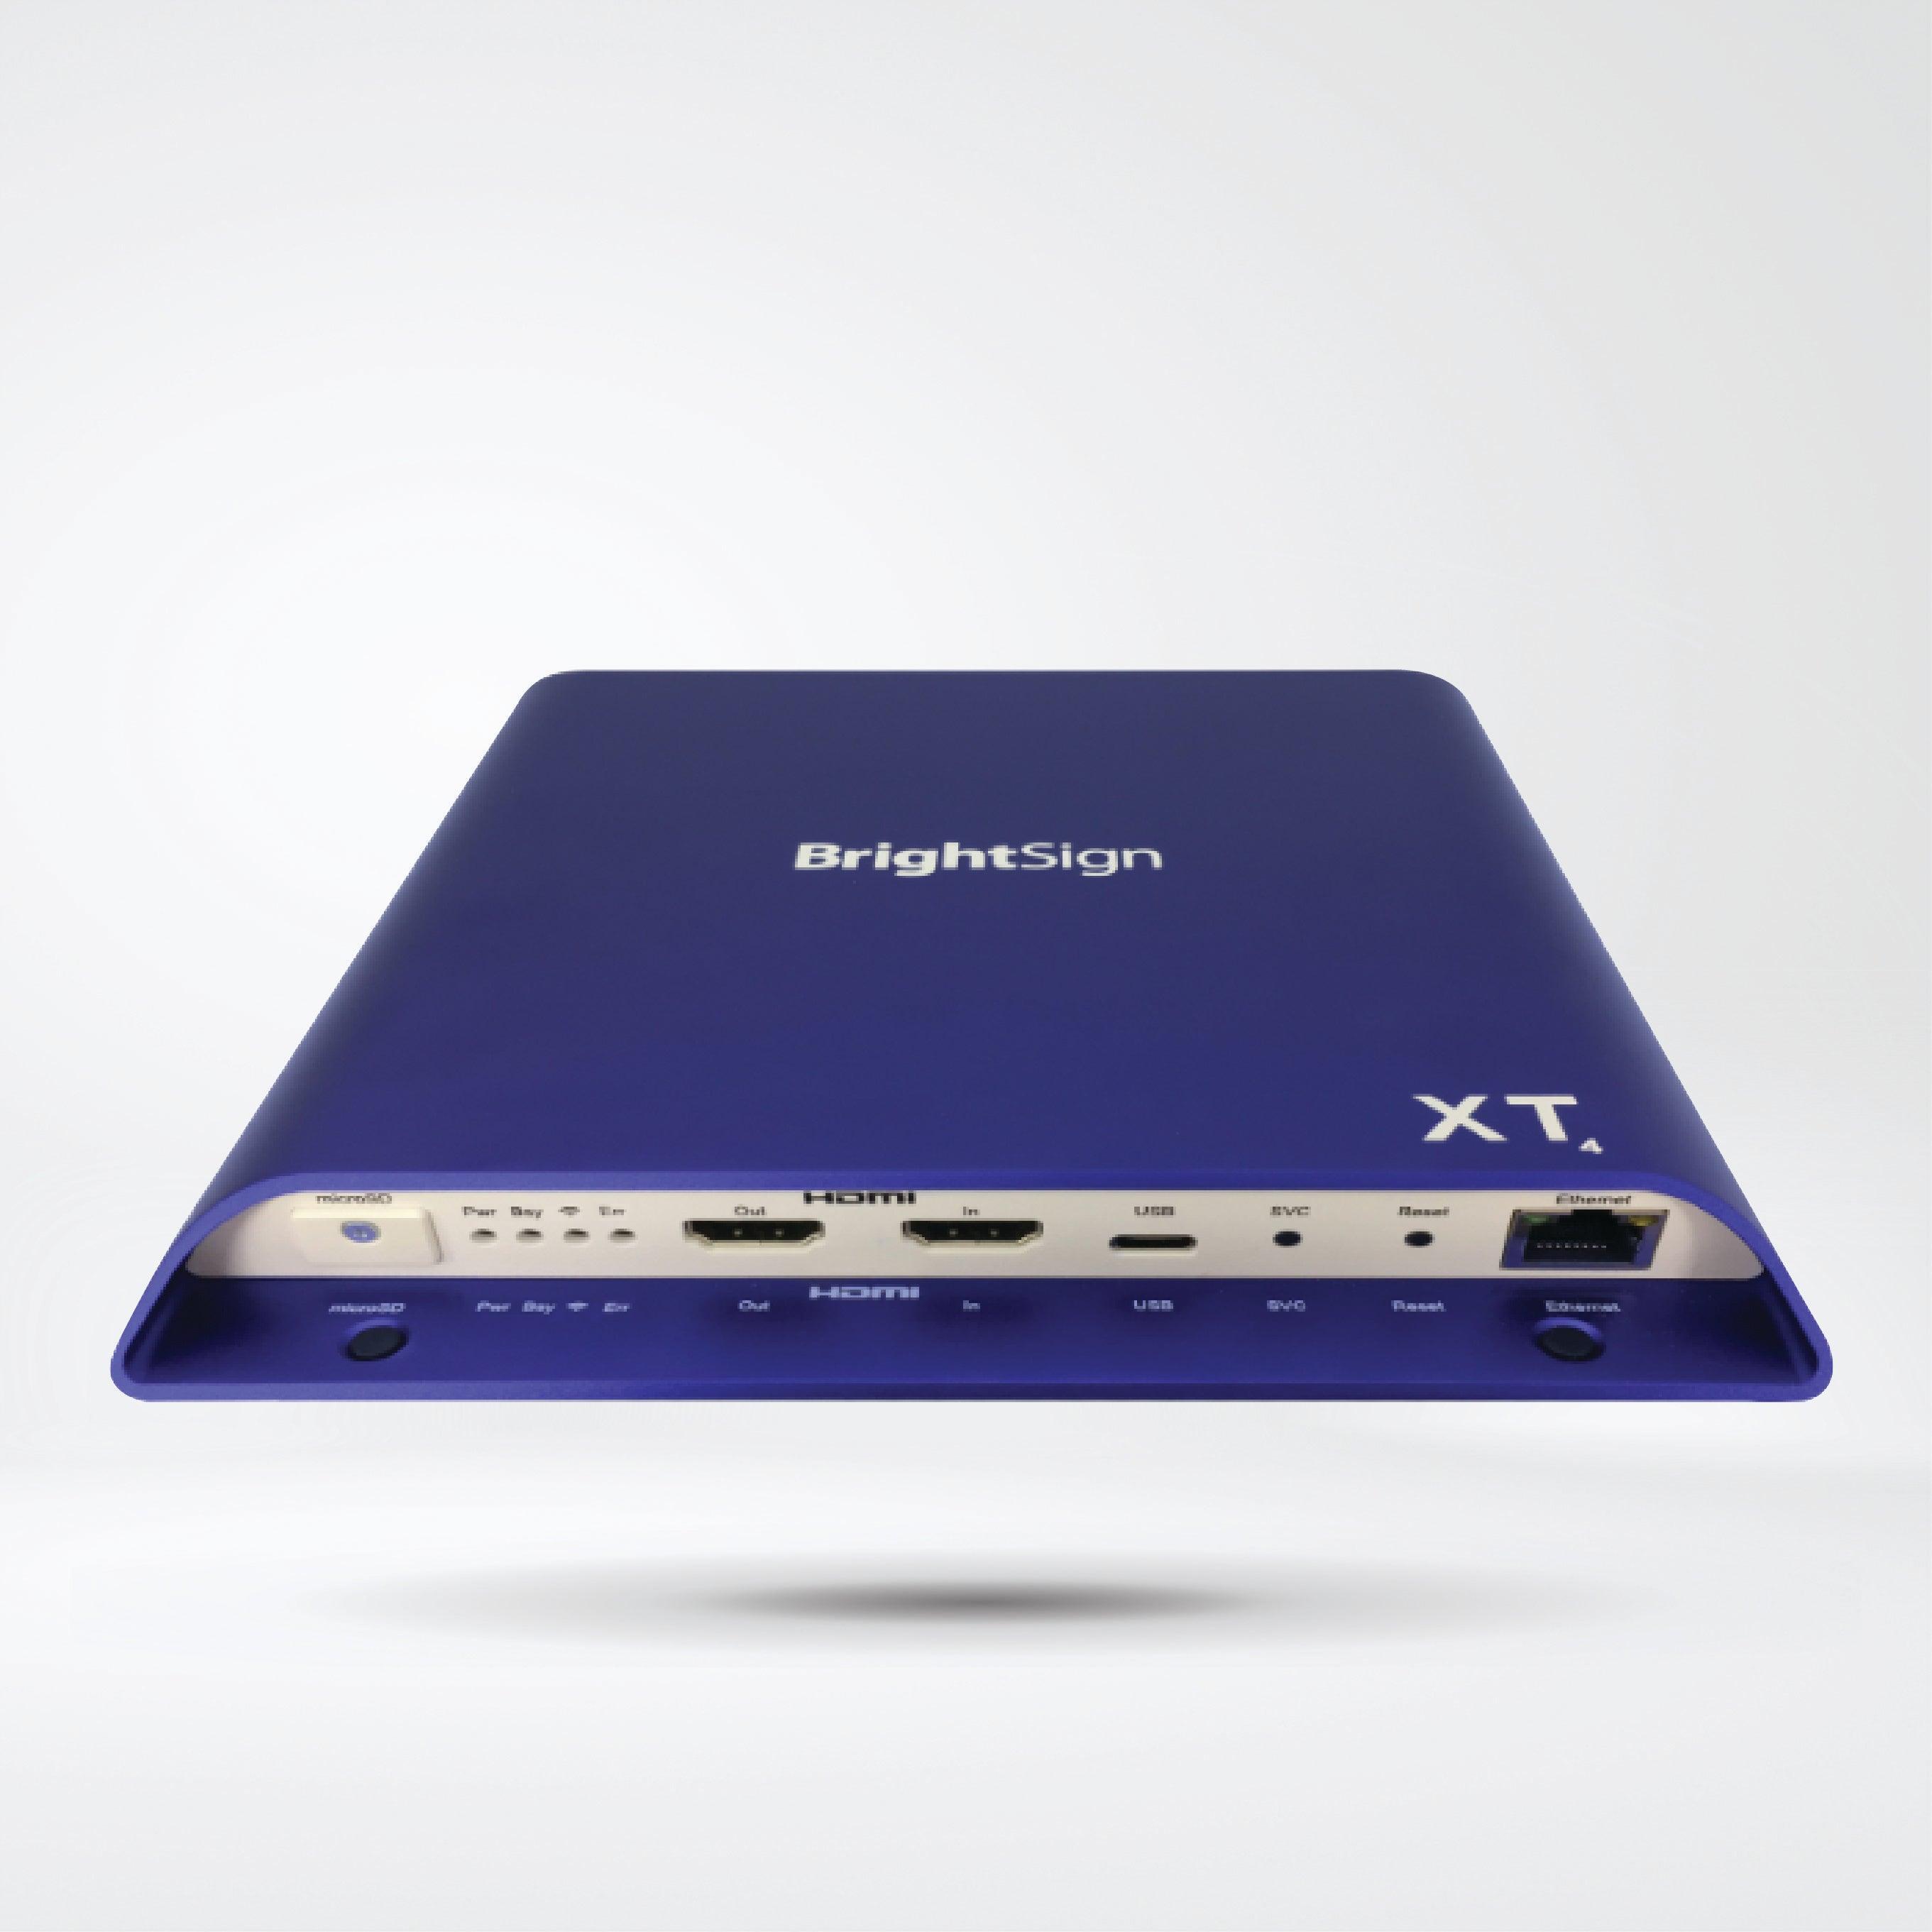 XT1144 - Expanded I/O Digital Signage Player + 64GB Micro SD - Riverplus